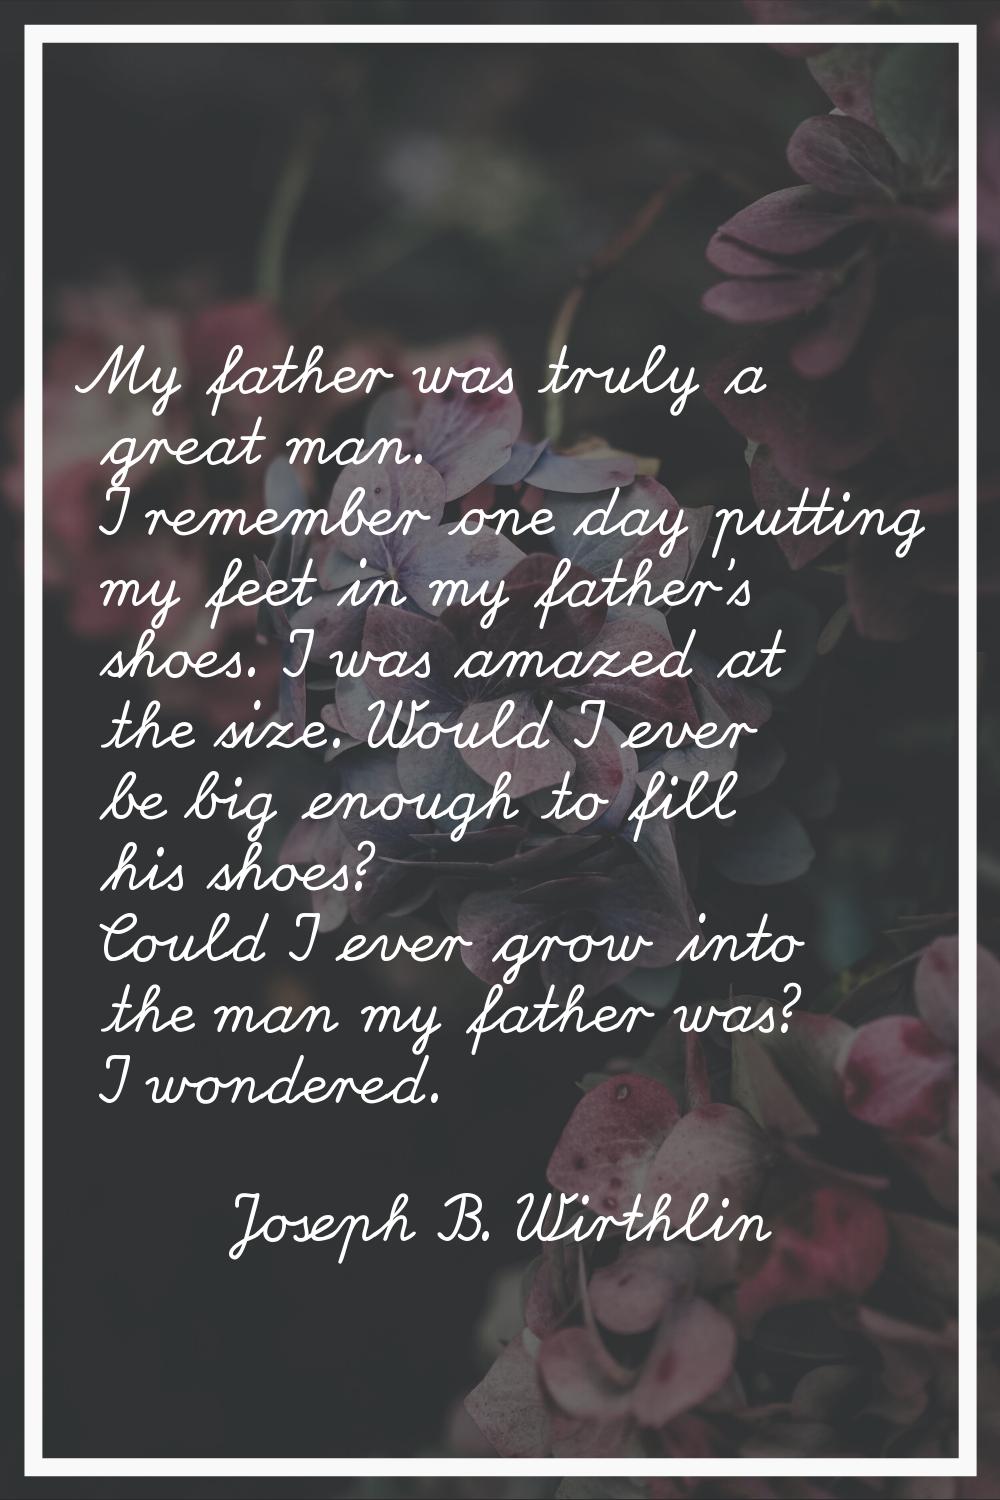 My father was truly a great man. I remember one day putting my feet in my father's shoes. I was ama